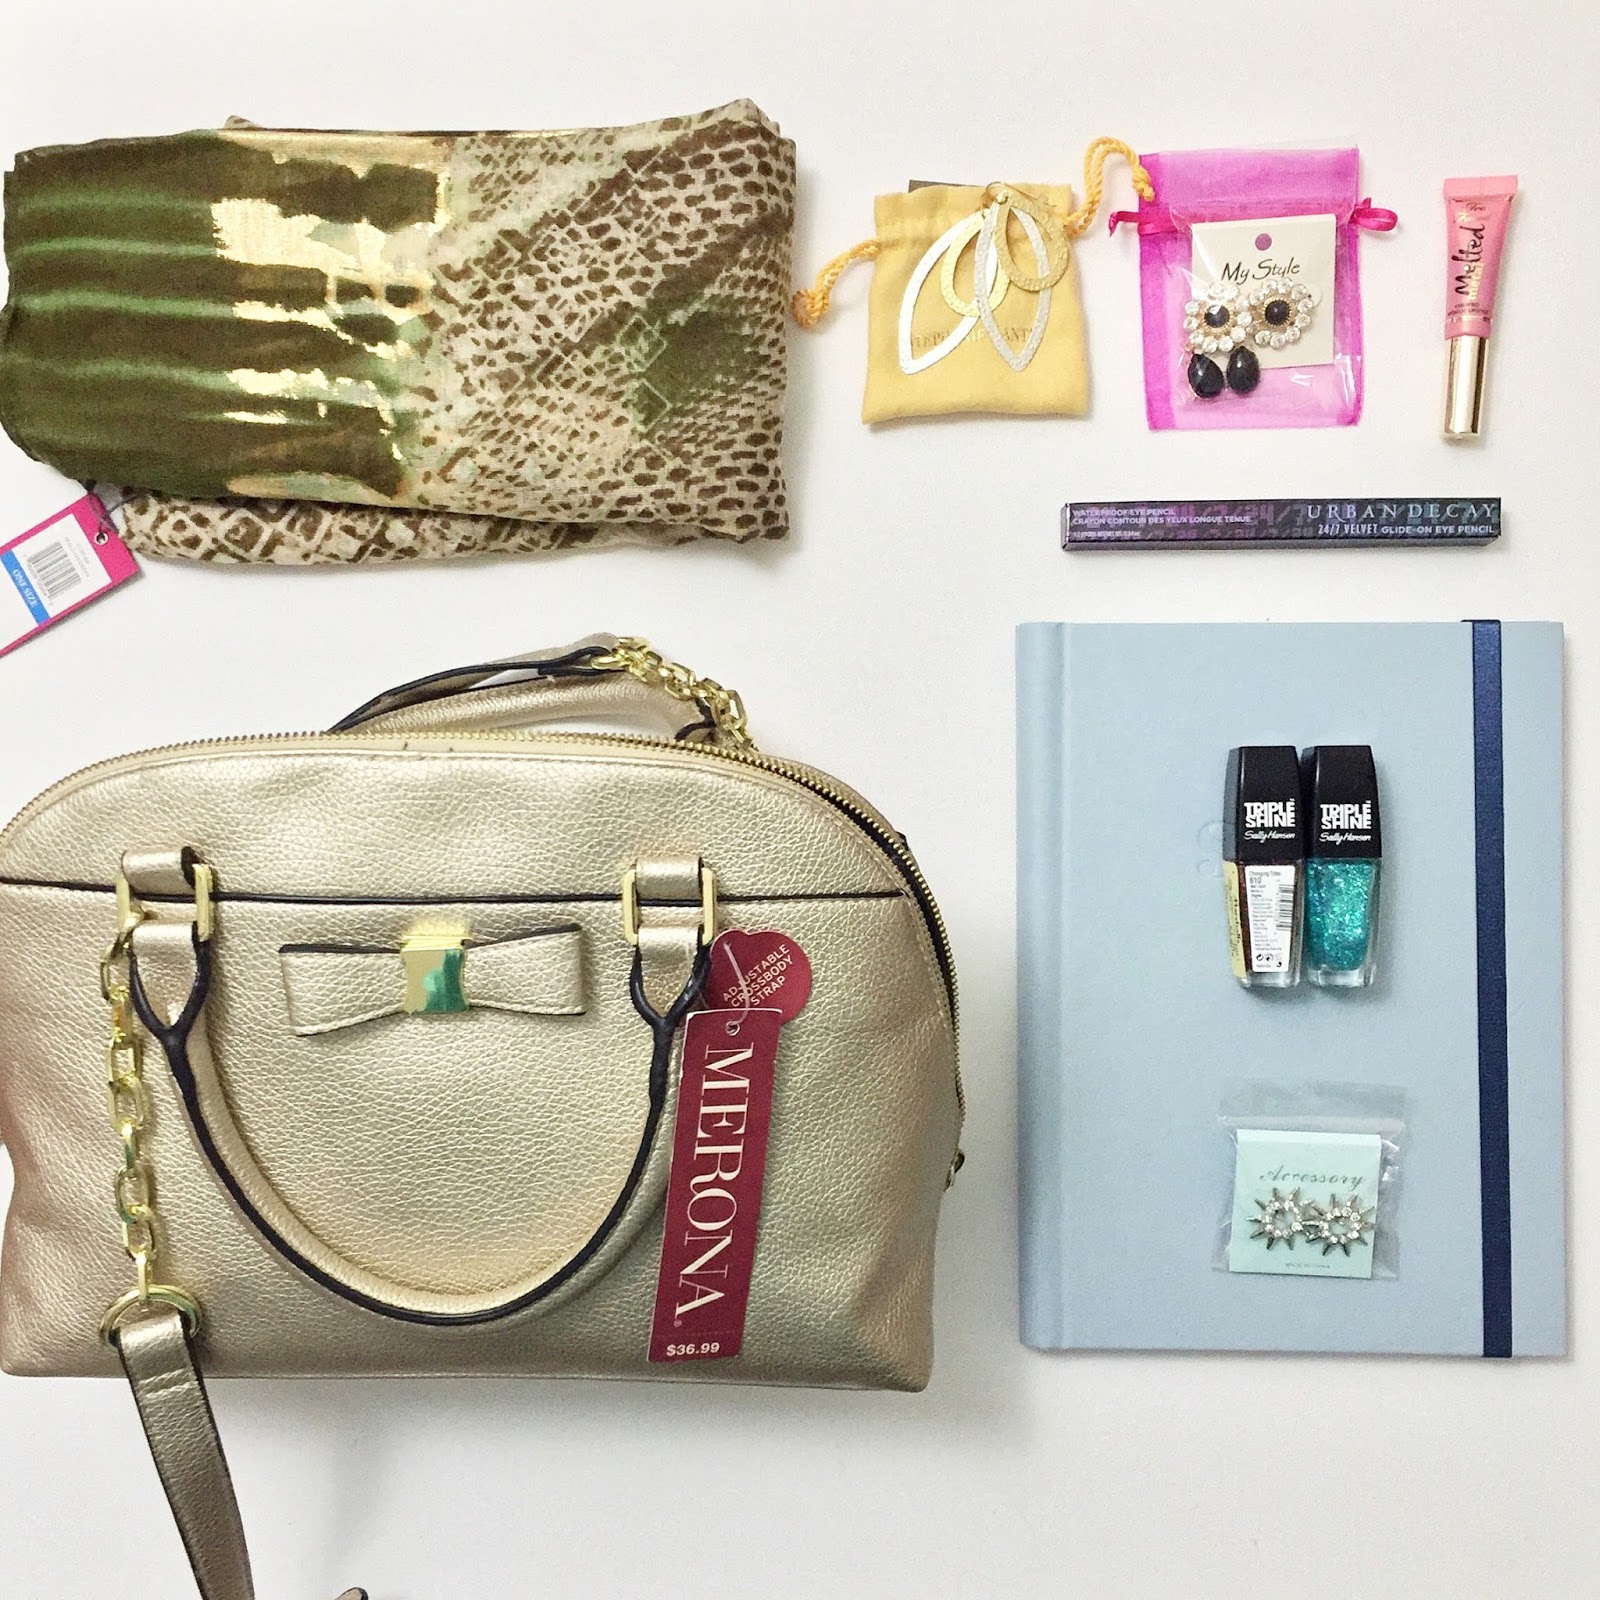 Girly Holiday Giveaway (valued $100+)